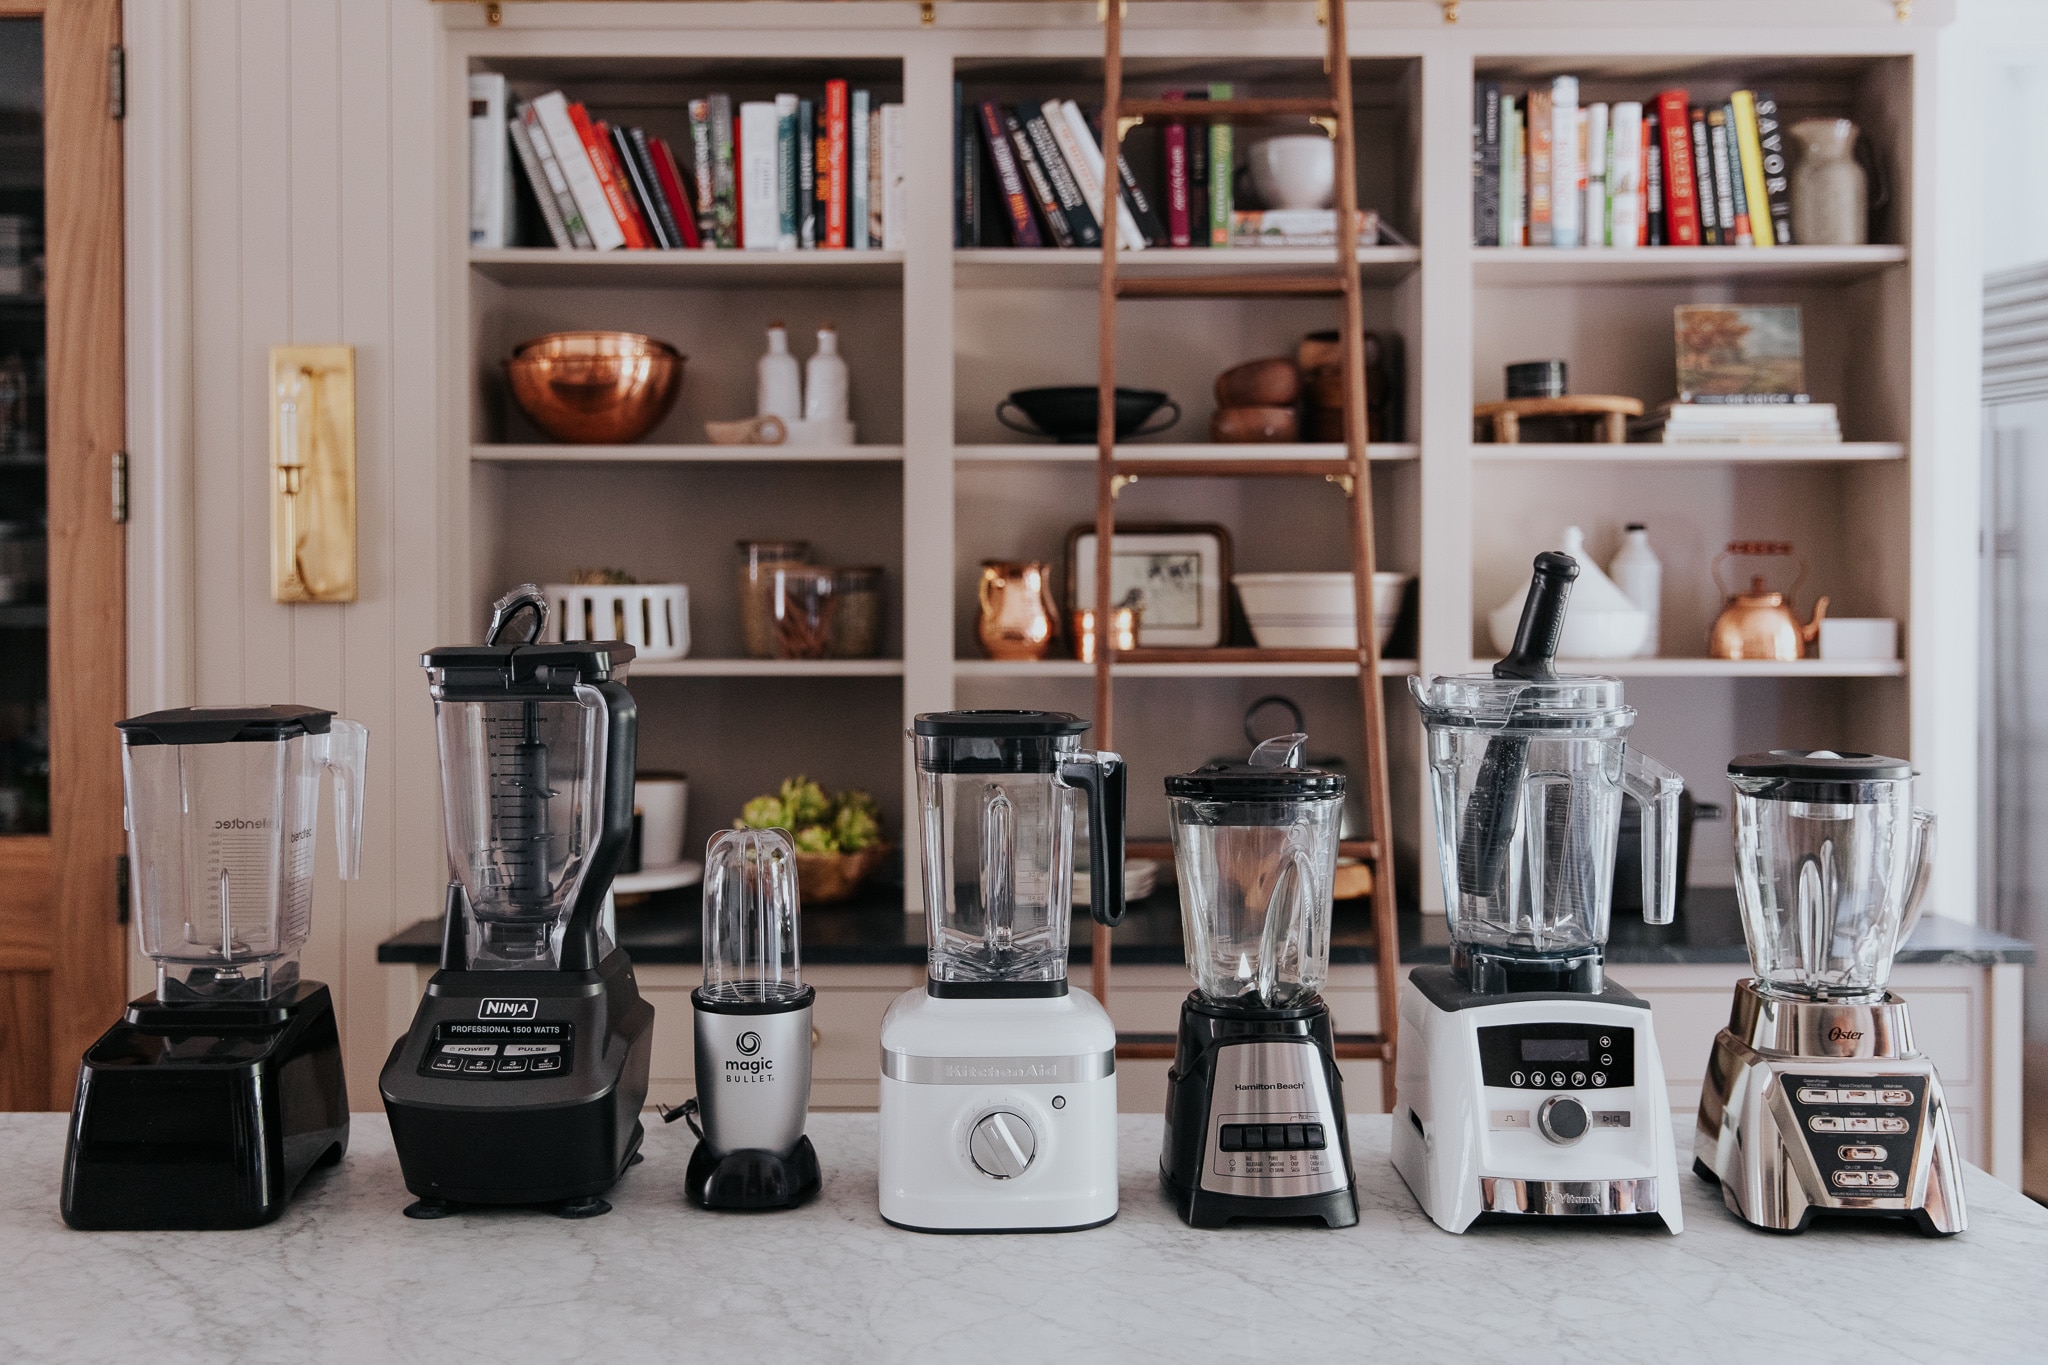 22 Best Blenders For Smoothies And More 2022 - Top-Rated Blenders